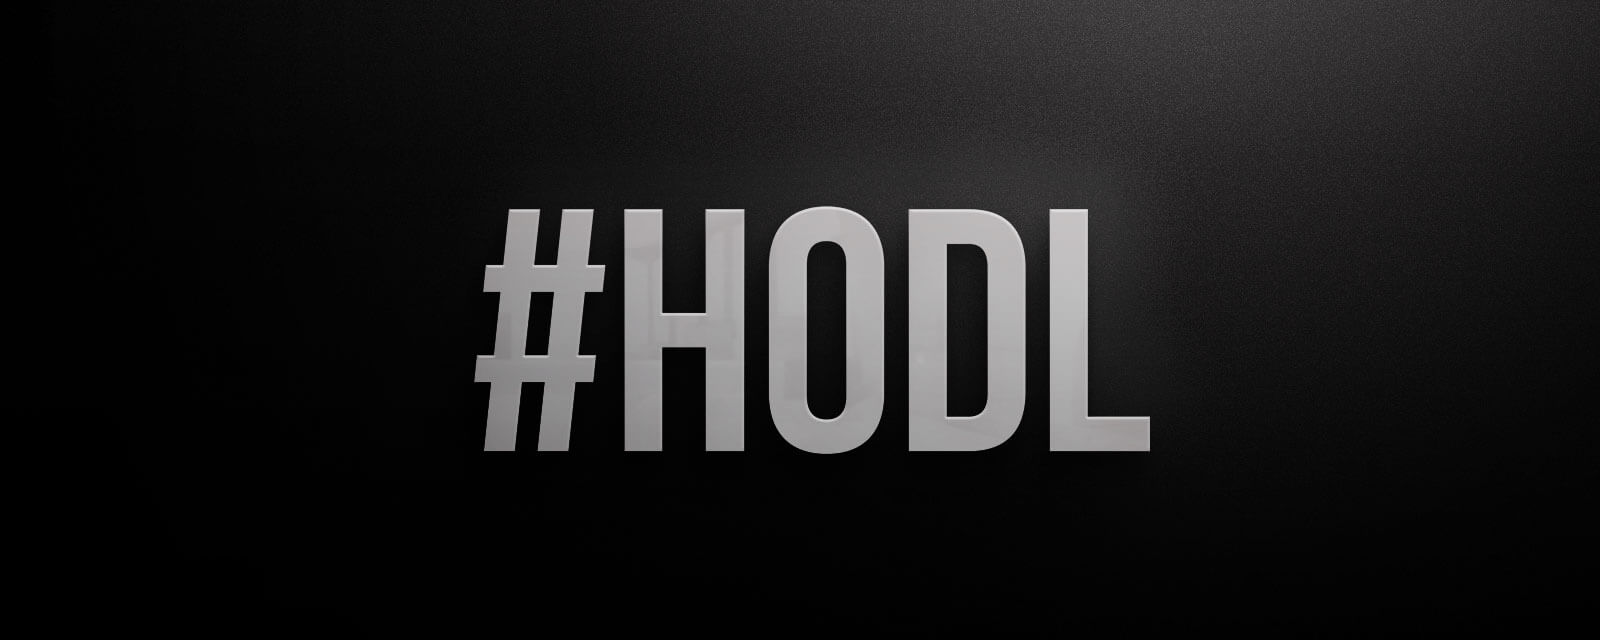 How to HODL: a guide to saving in Bitcoin (BTC).